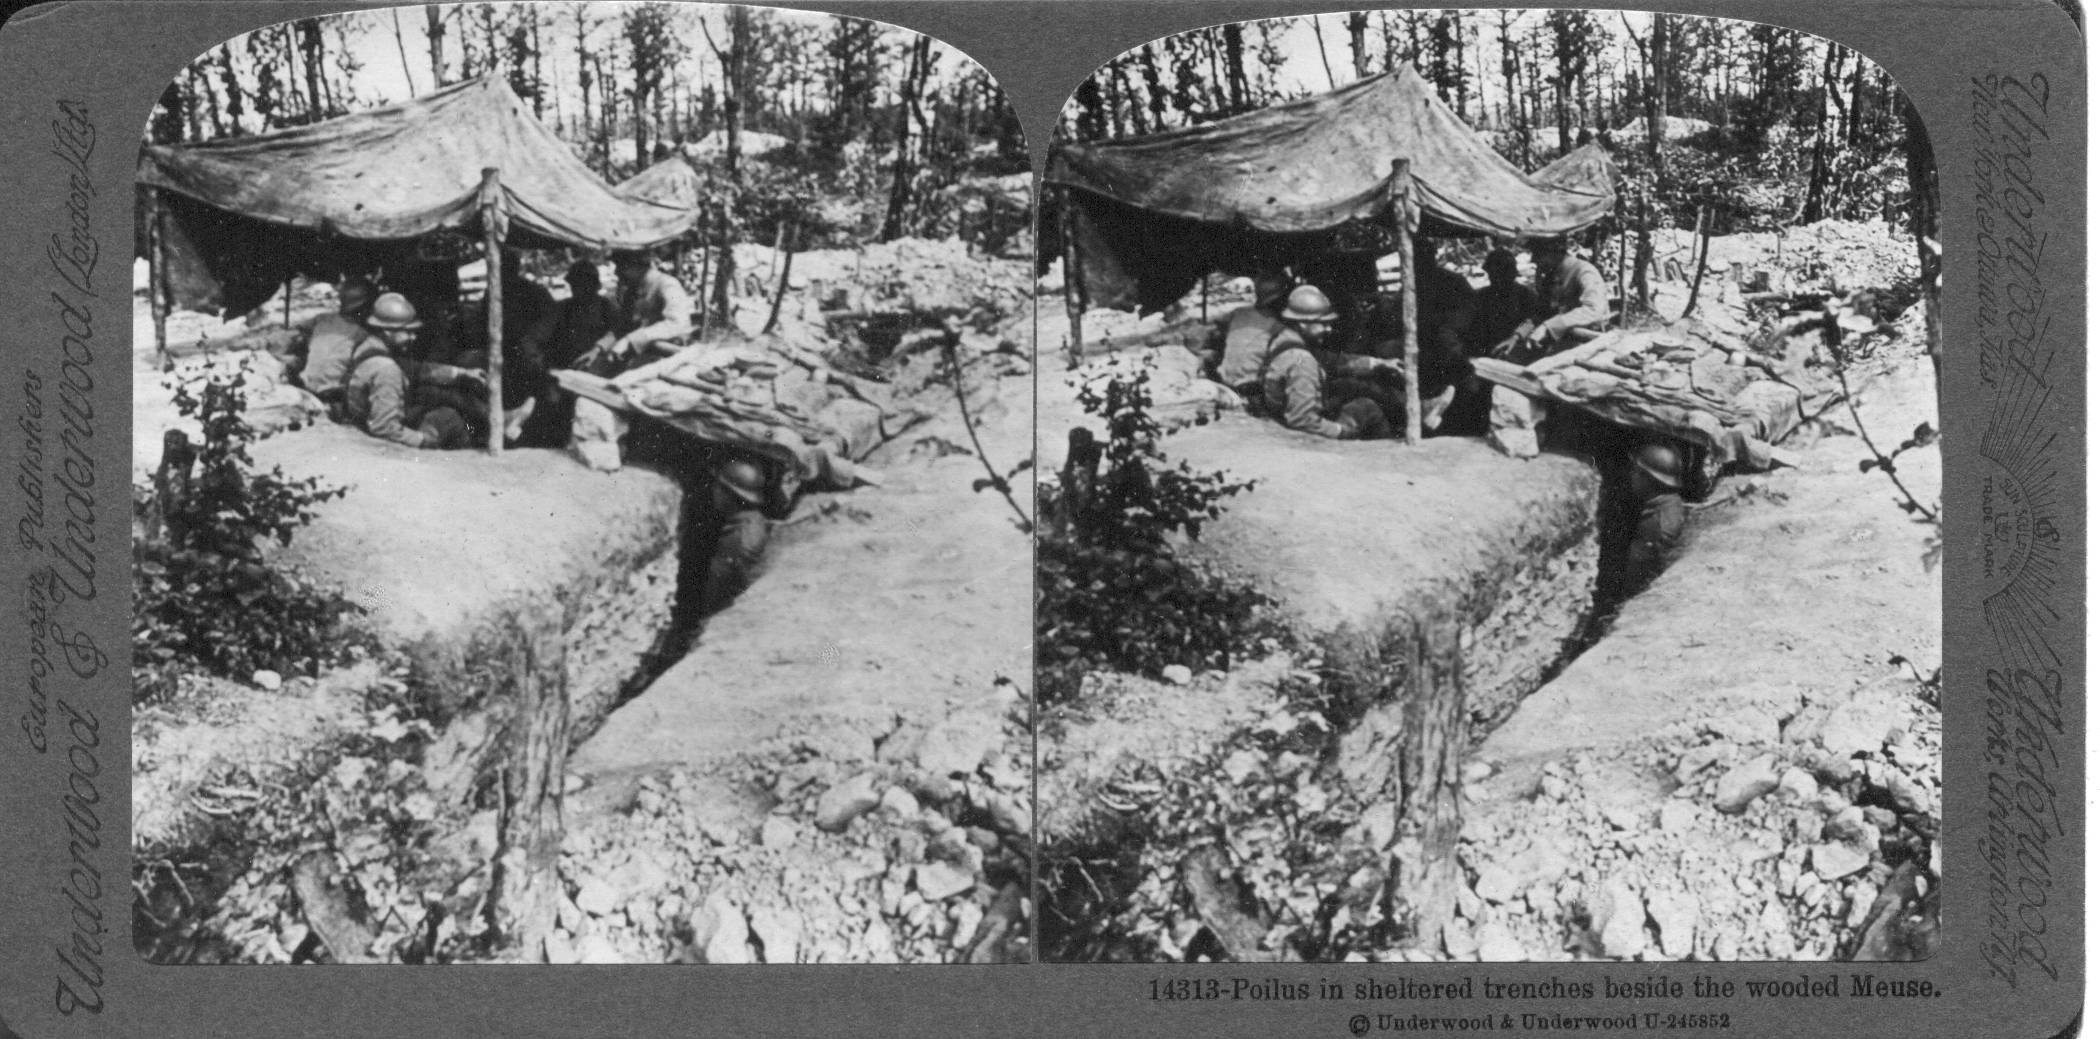 Poilus in sheltered trenches beside the wooded Meuse